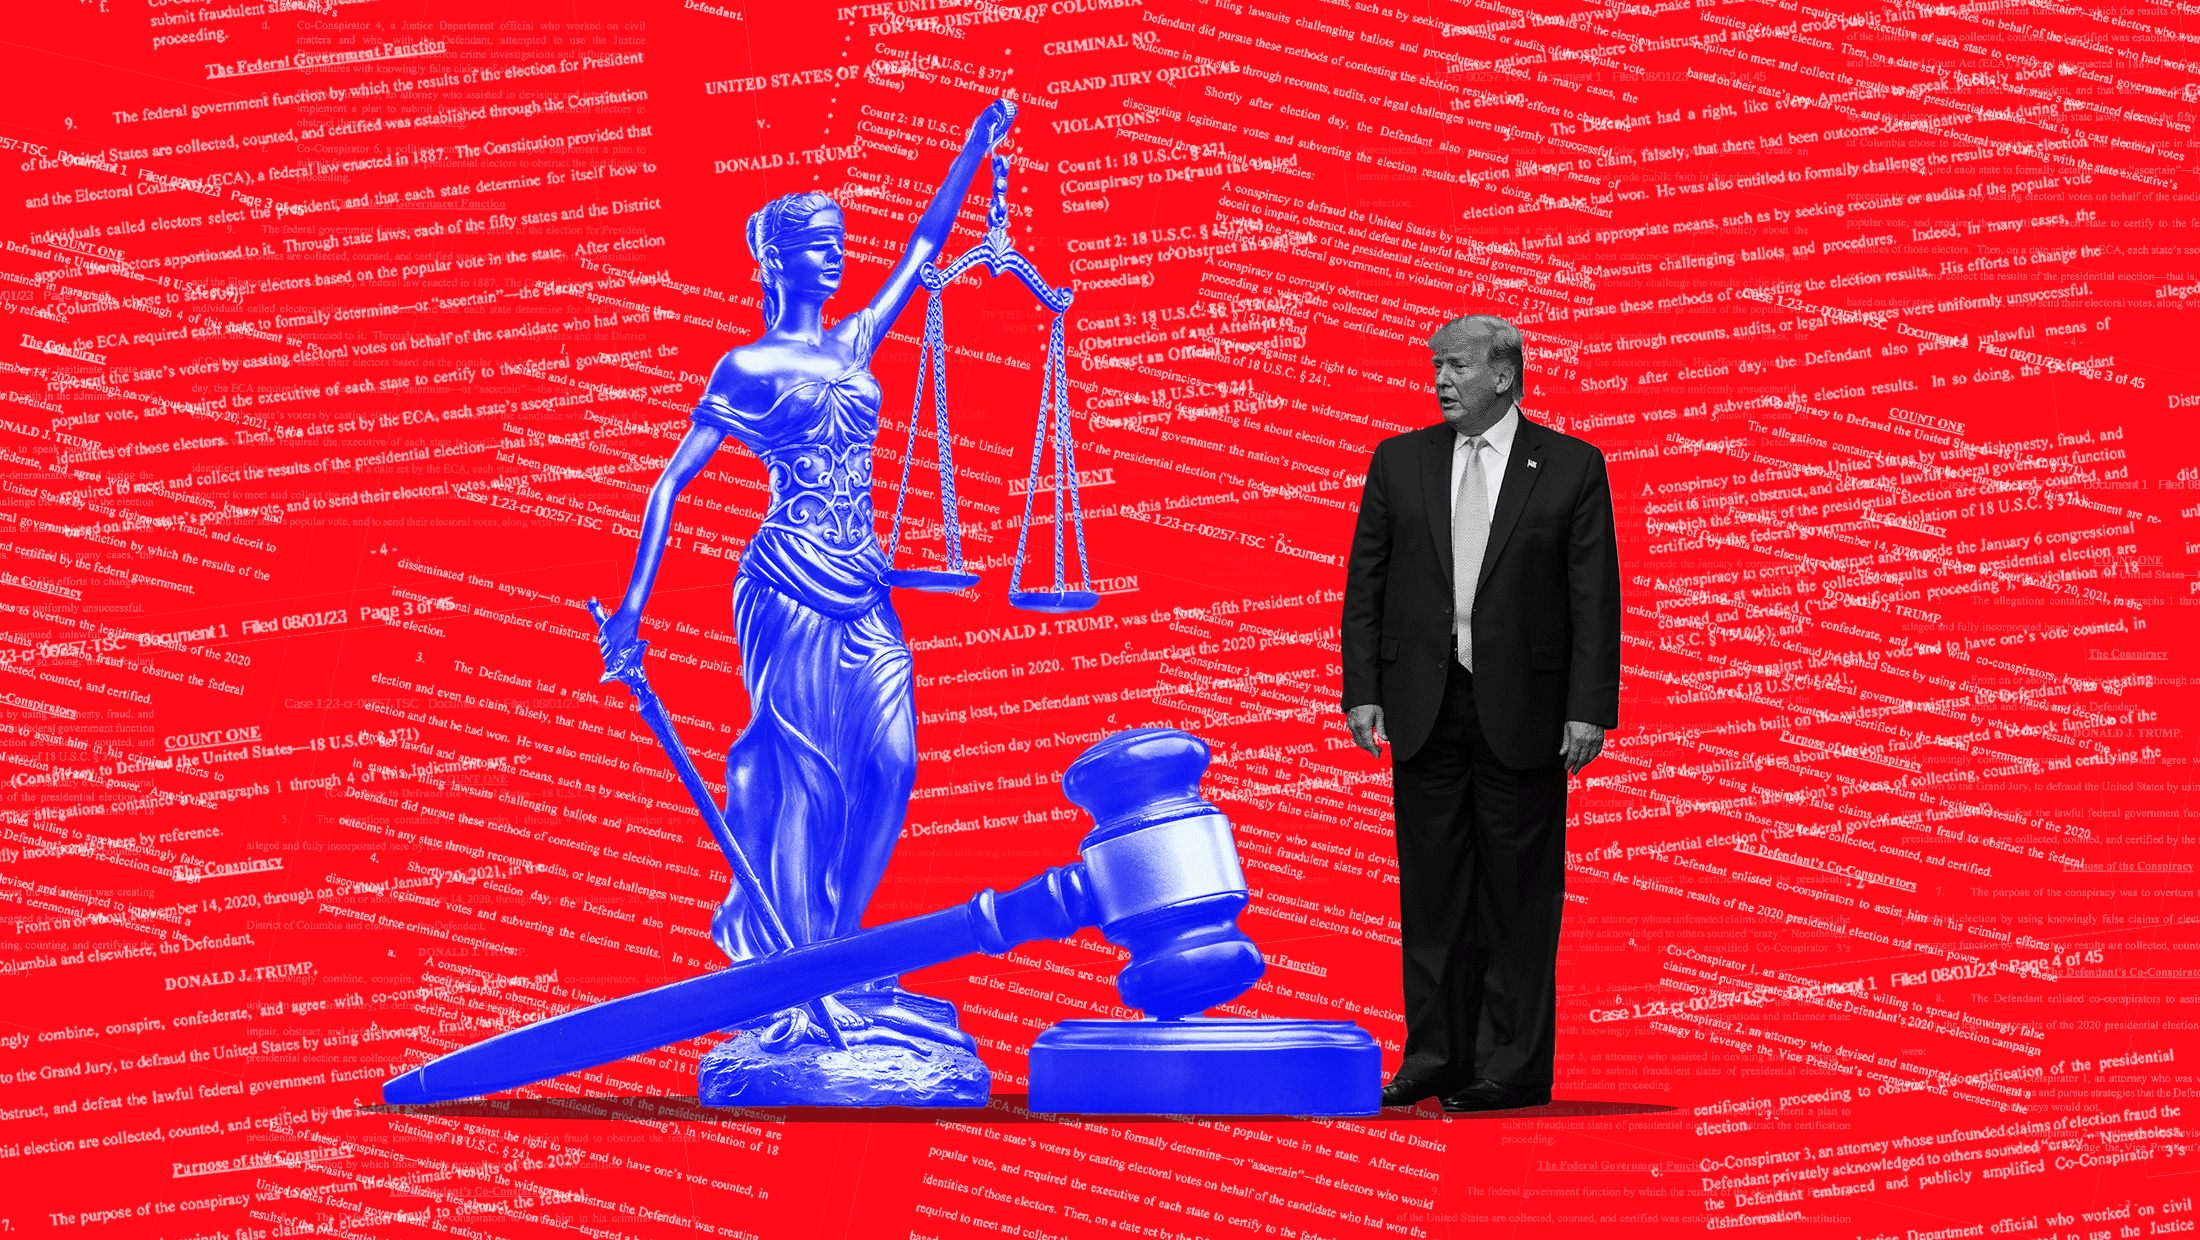 Trump standing next to a blue judges hammer and blue scale, in front of a red background.